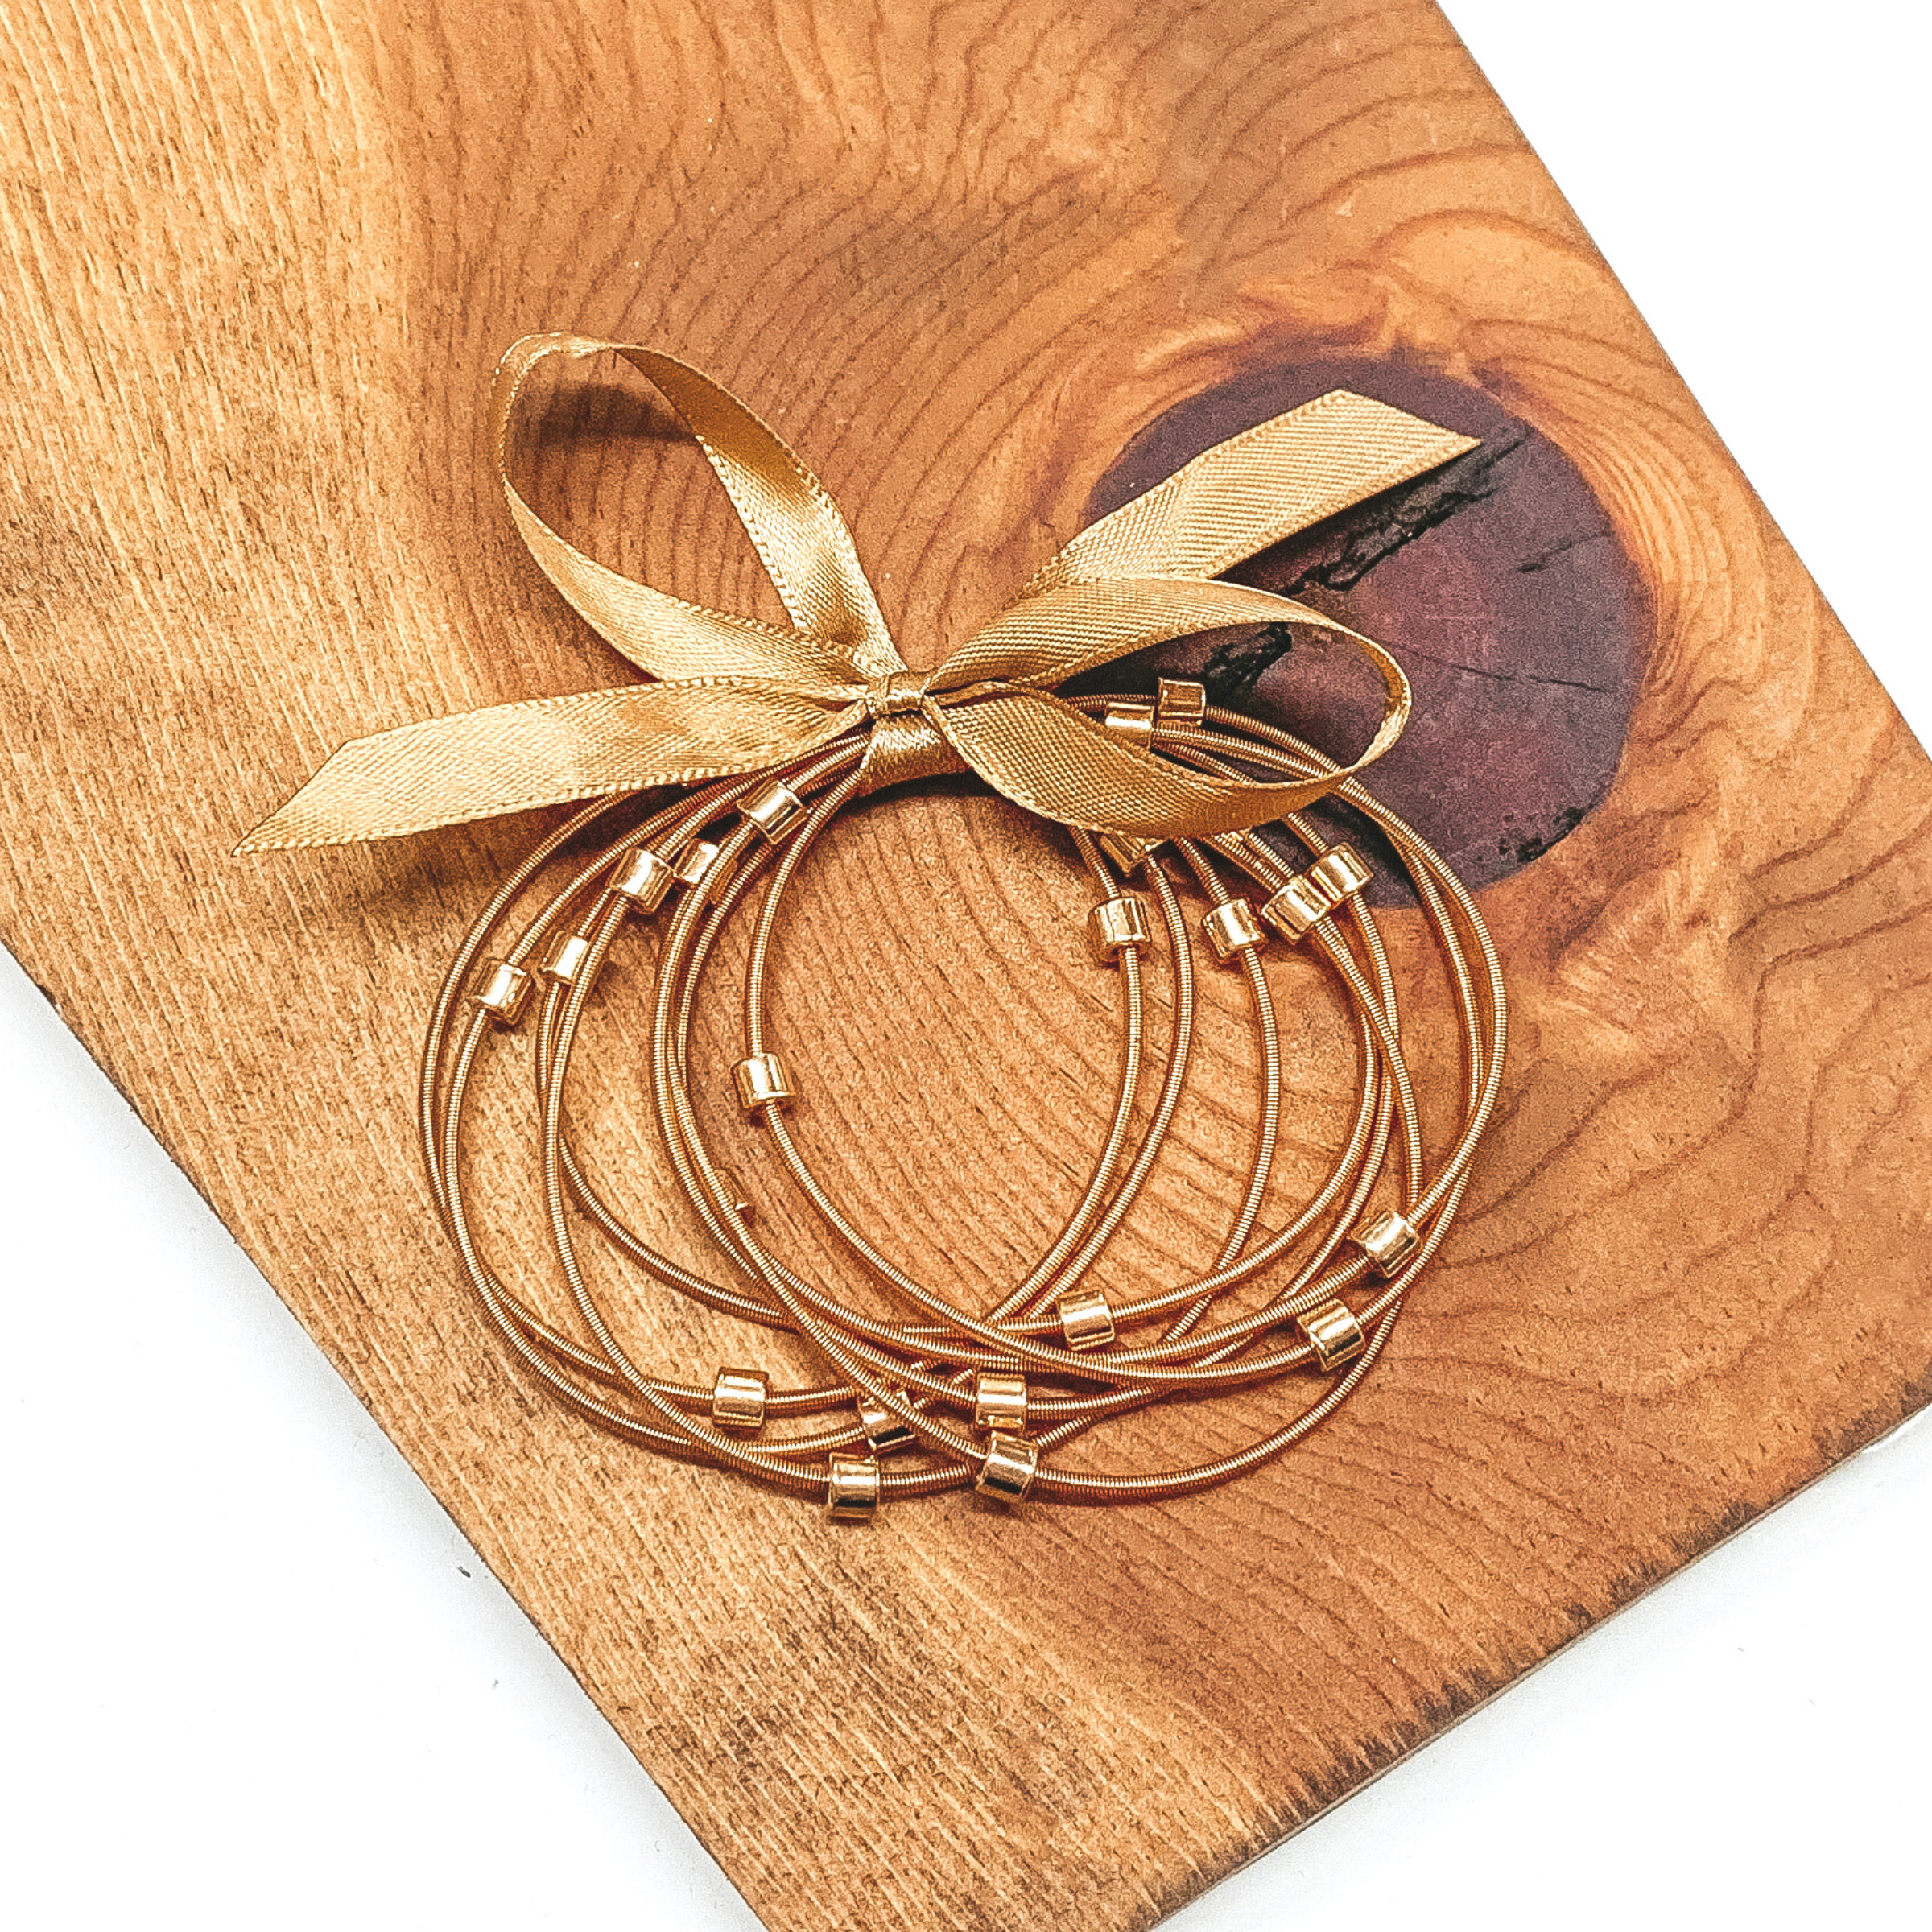 Group of gold spring wire elastic bracelet set tied together with a gold ribbon that is tied in a bow. All of the bracelets have small gold beads. This bracelet set is pictured laying next on a piece of wood on a white background.